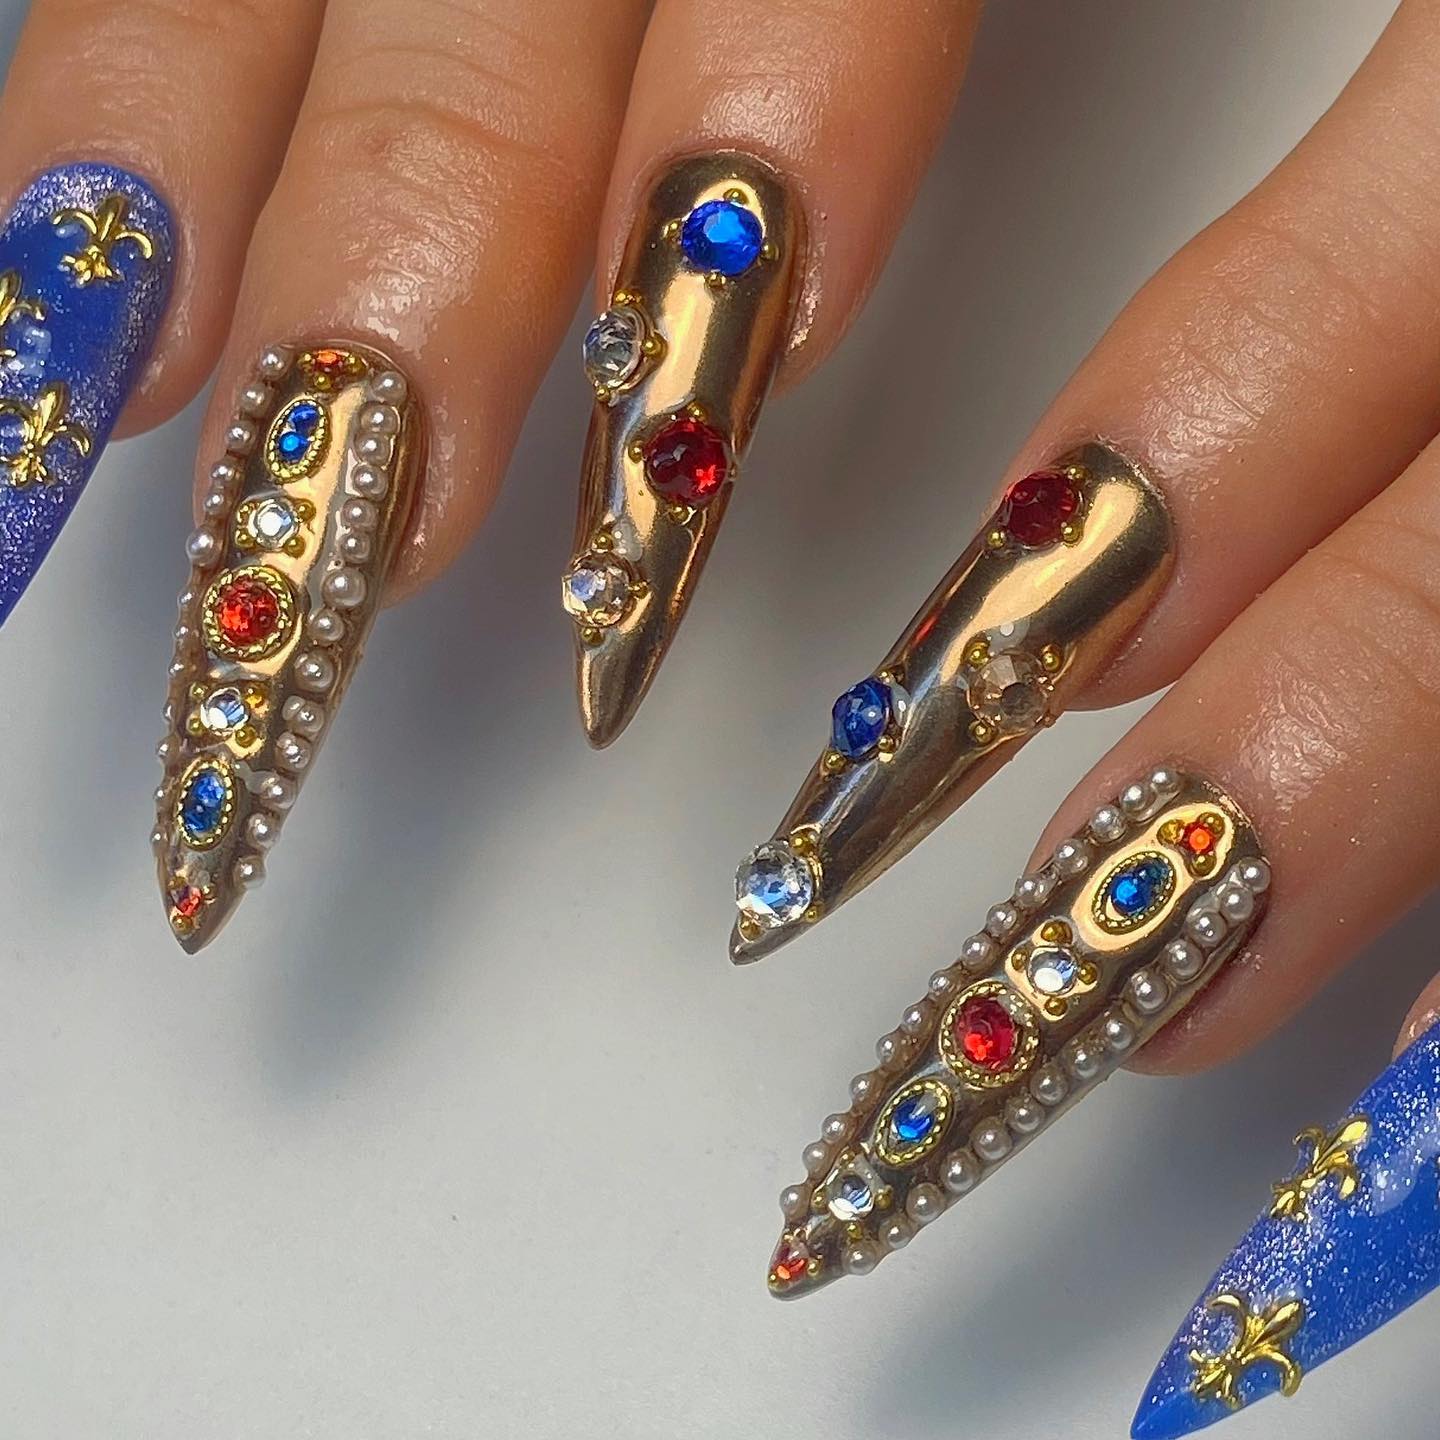 Gold Stiletto Nails with Colorful Rhinestones